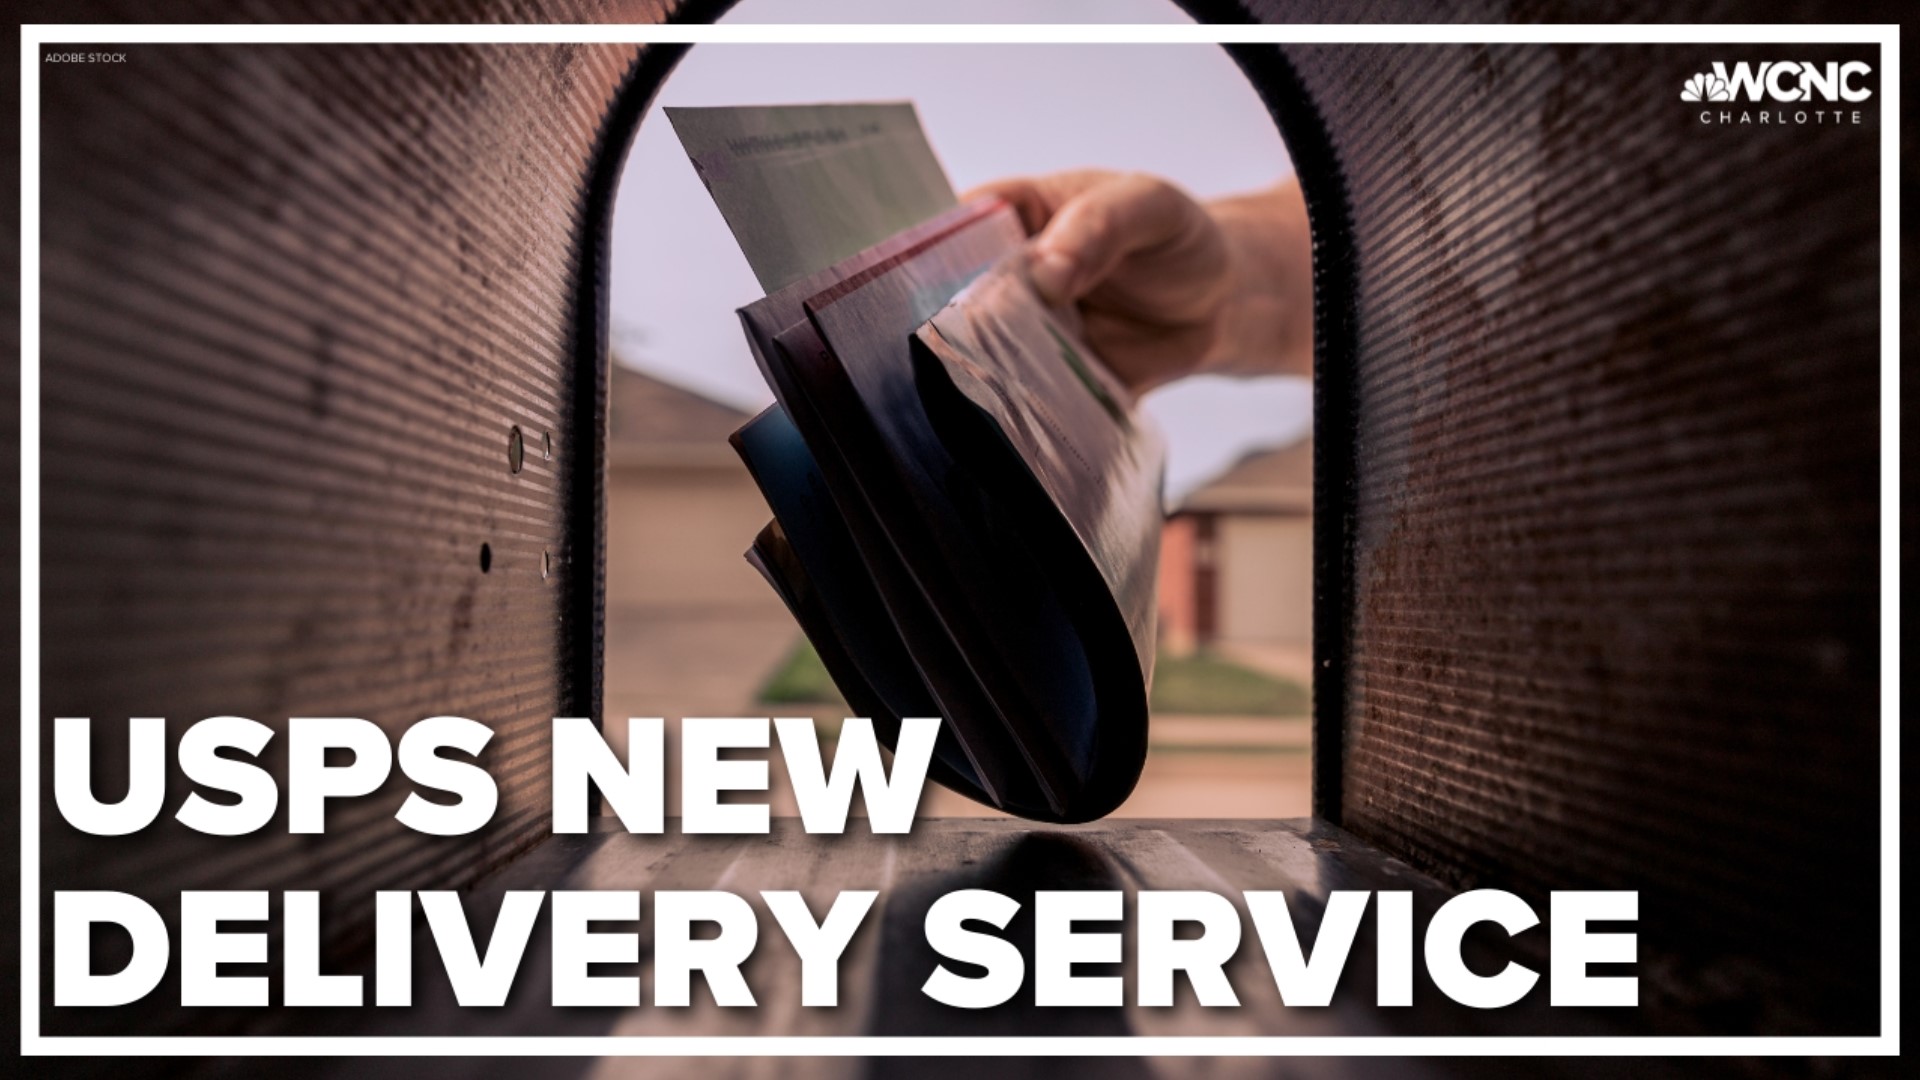 USPS Connect offers business customers same-day and next-day delivery options at lower rates.